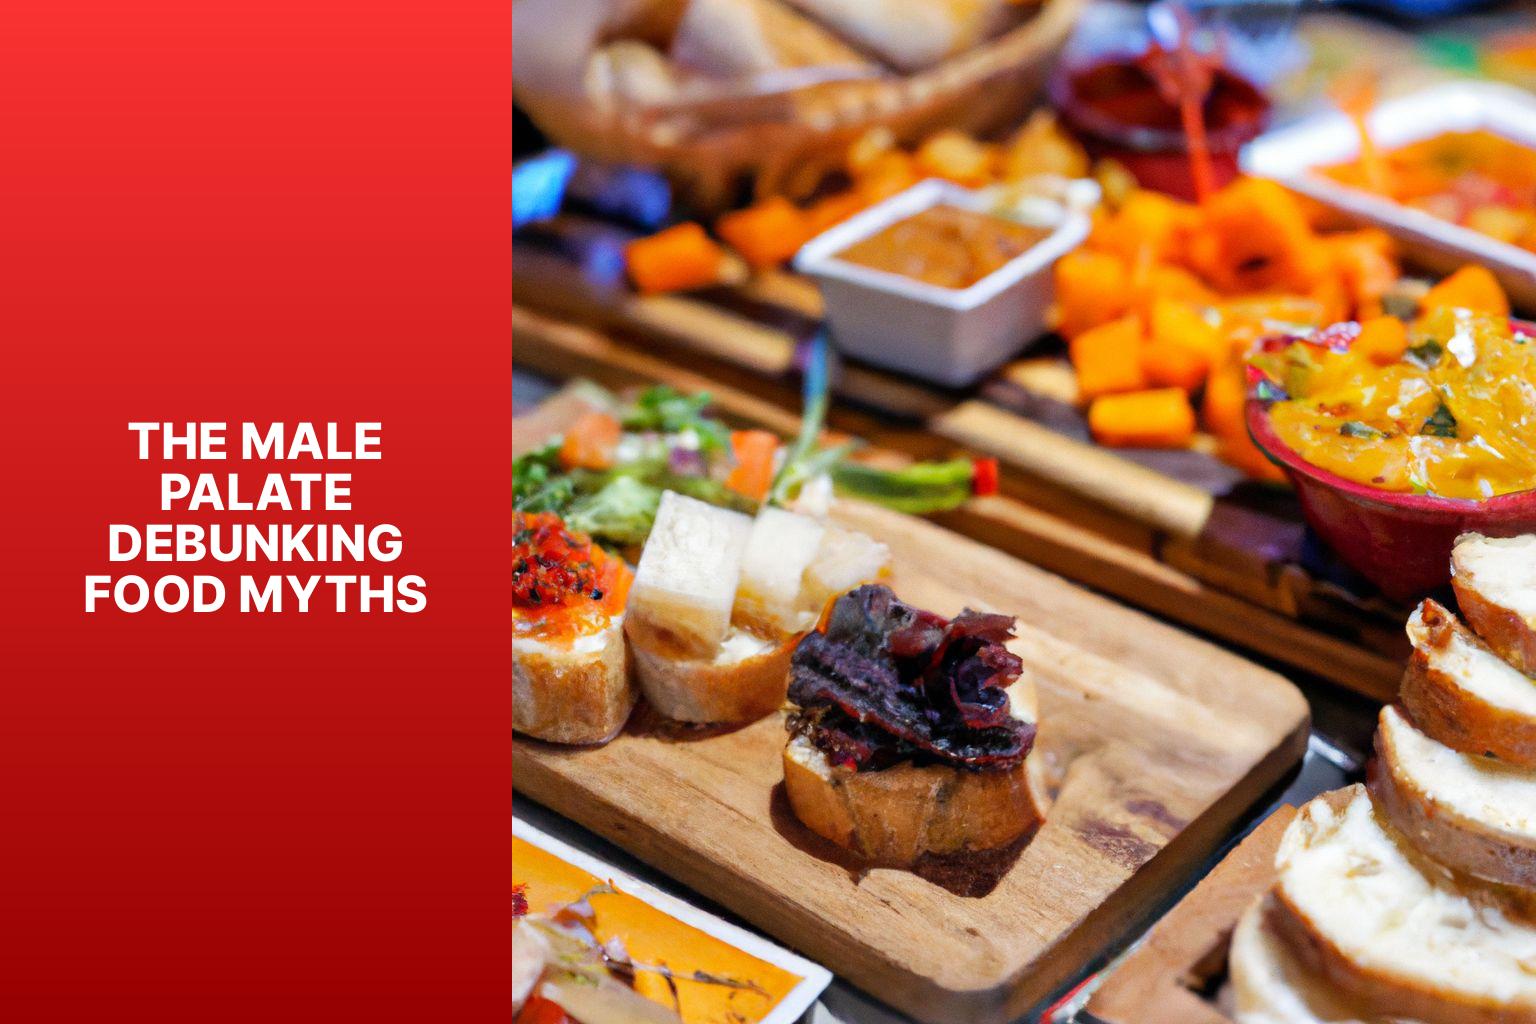 The Male Palate: Debunking Food Myths